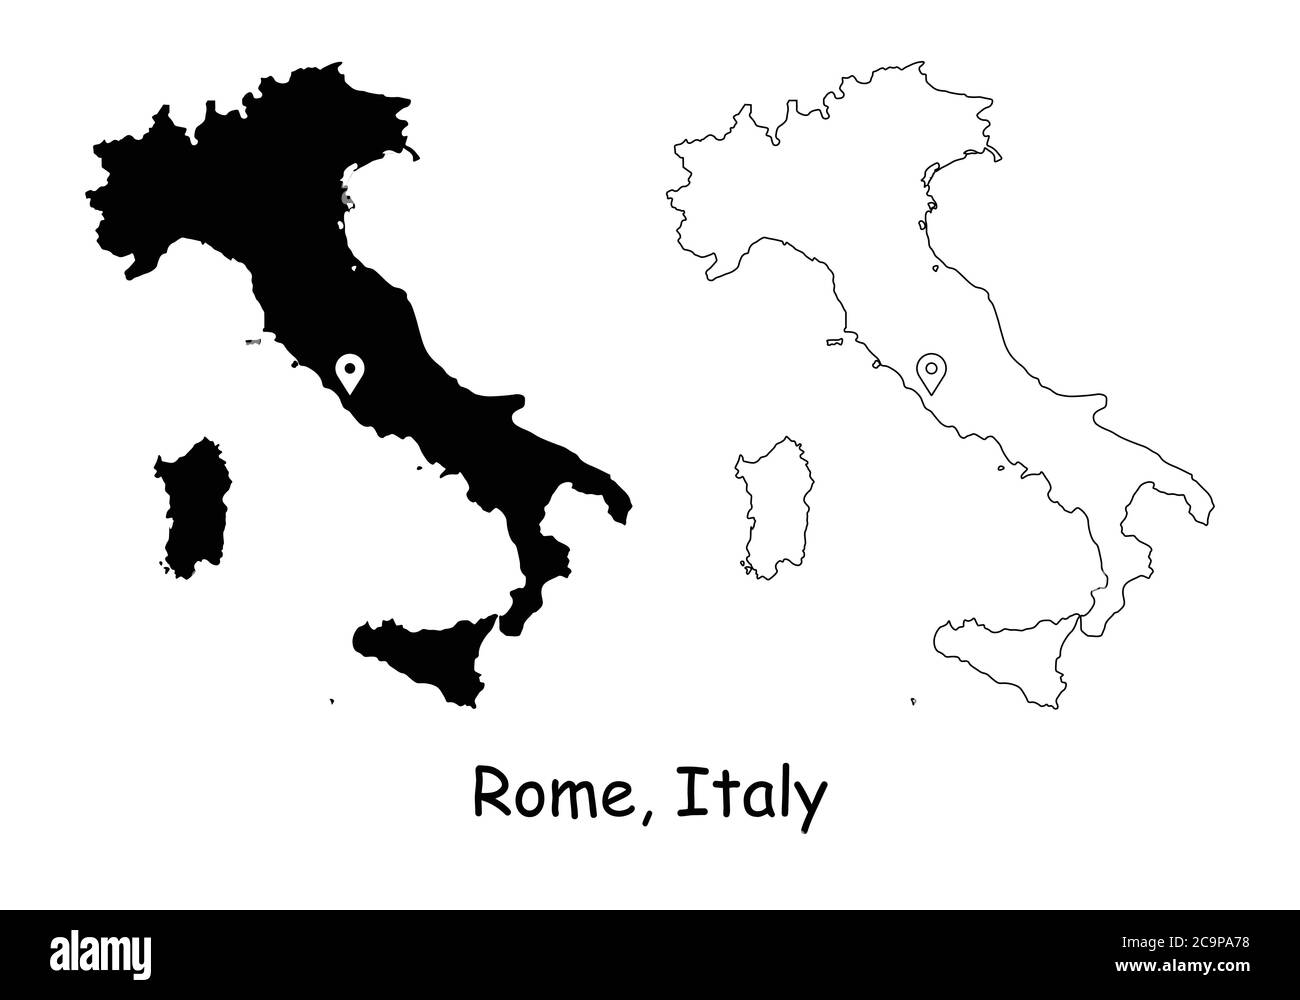 Rome Italy. Detailed Country Map with Location Pin on Capital City. Black silhouette and outline maps isolated on white background. EPS Vector Stock Vector